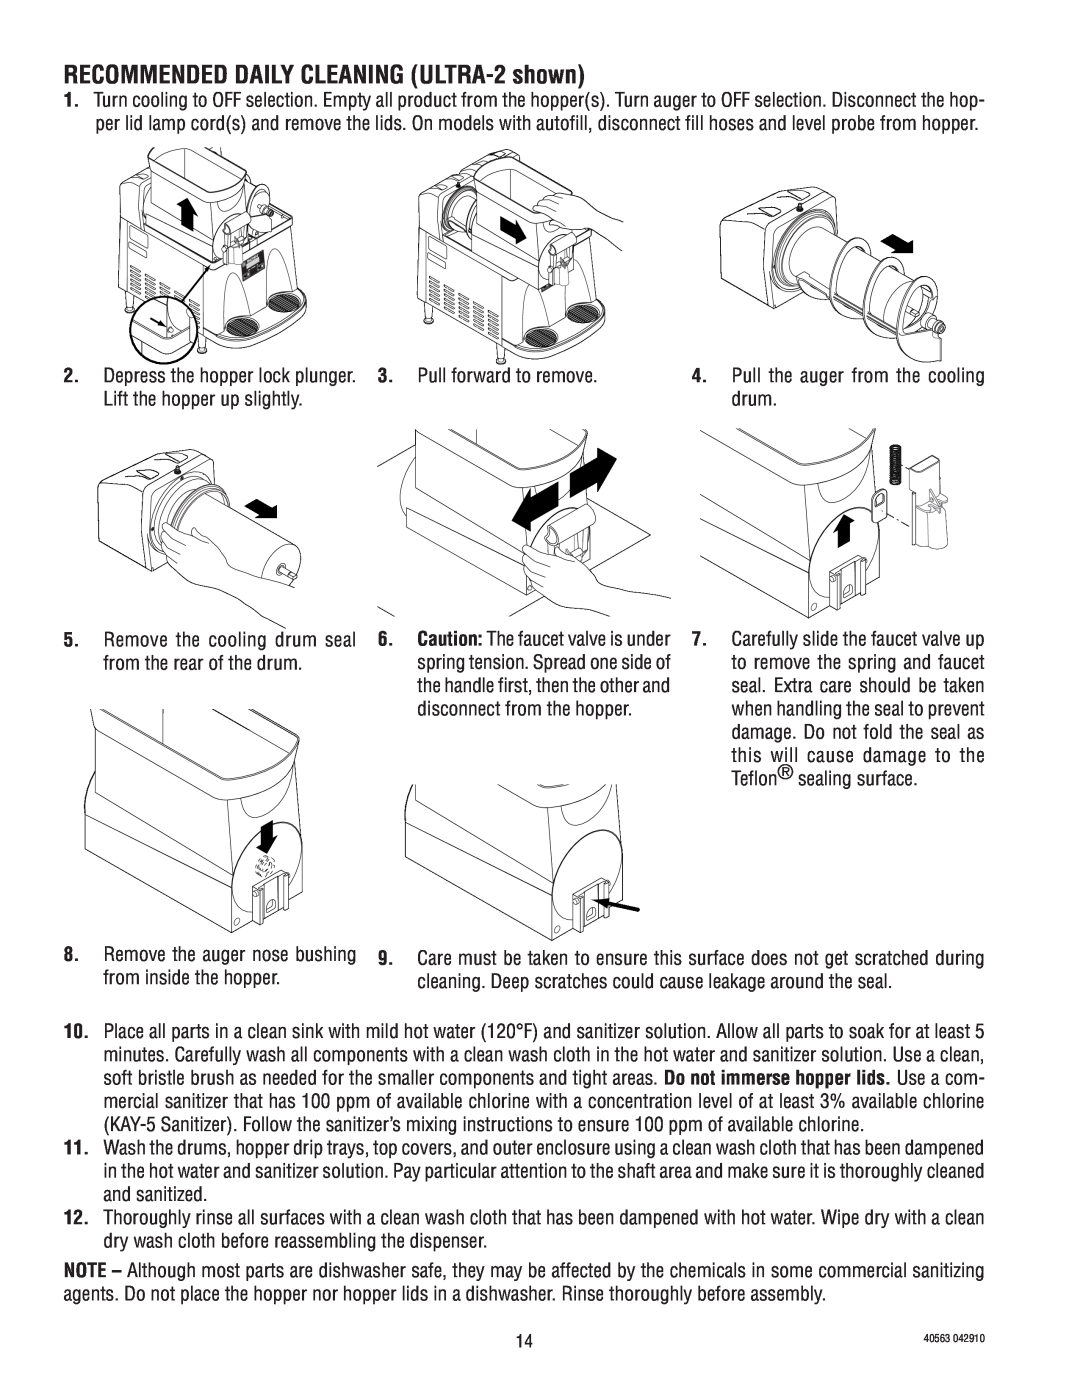 Bunn ULTRA-1 service manual RECOMMENDED DAILY CLEANING ULTRA-2shown 